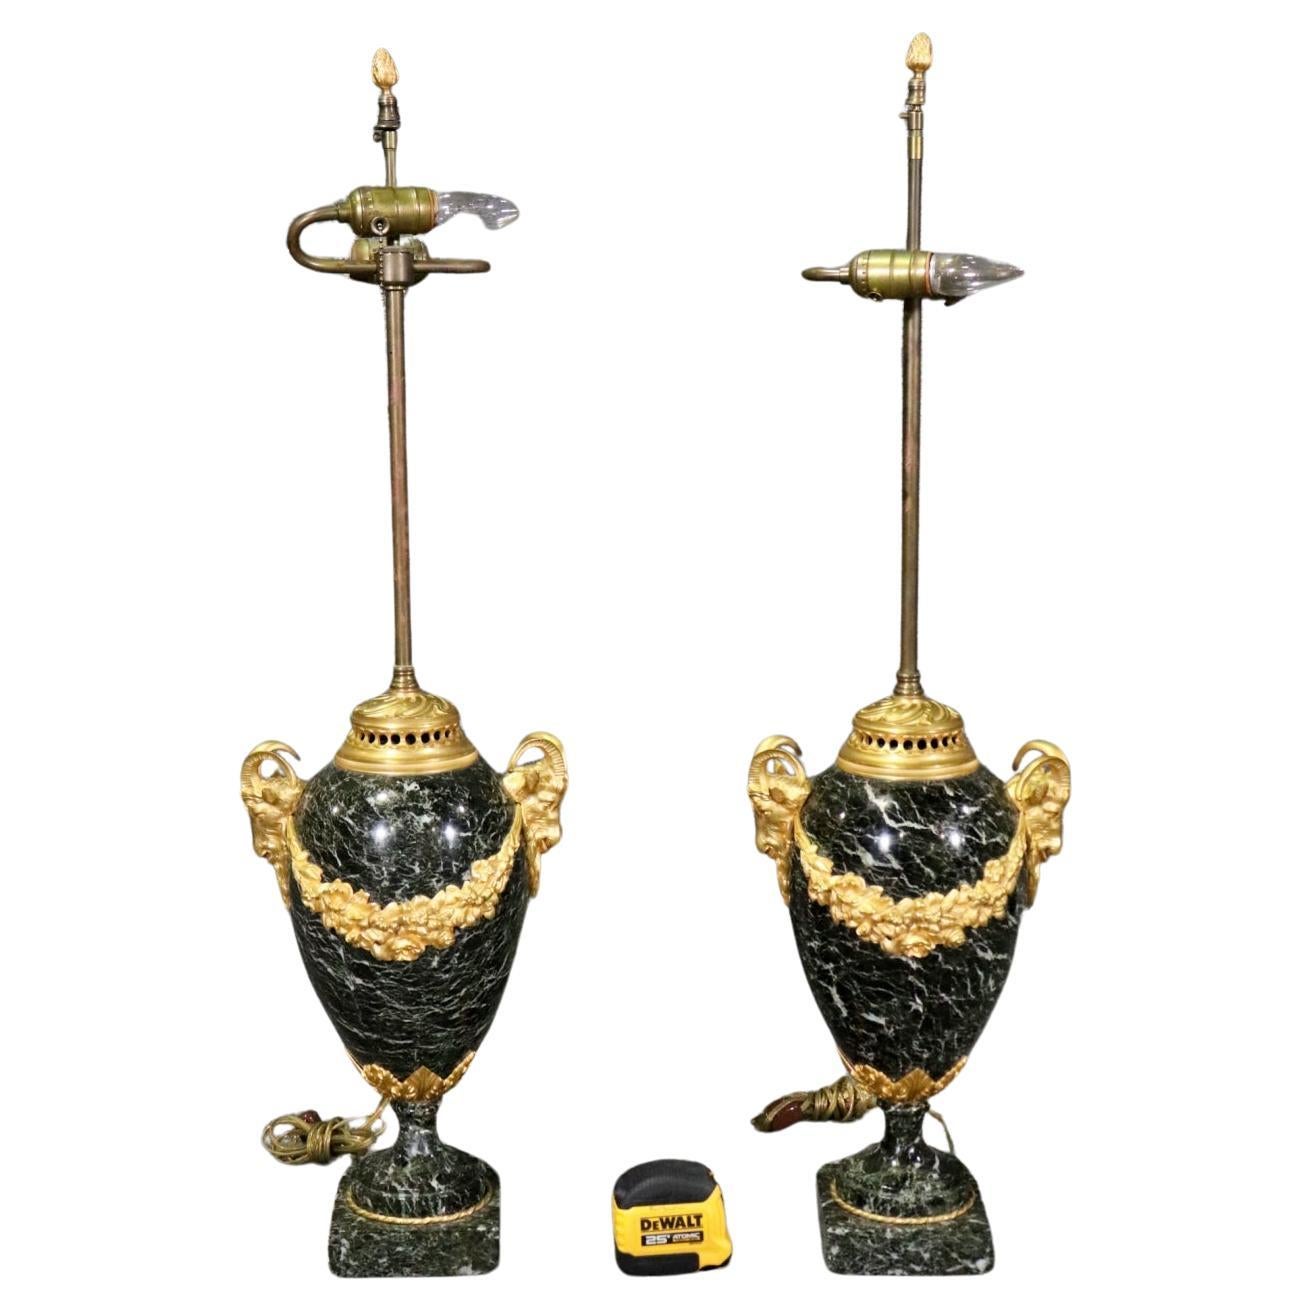 Fantastic Bronze Mounted Dore' and Verdi Marble French Cassolette Table Lamps For Sale